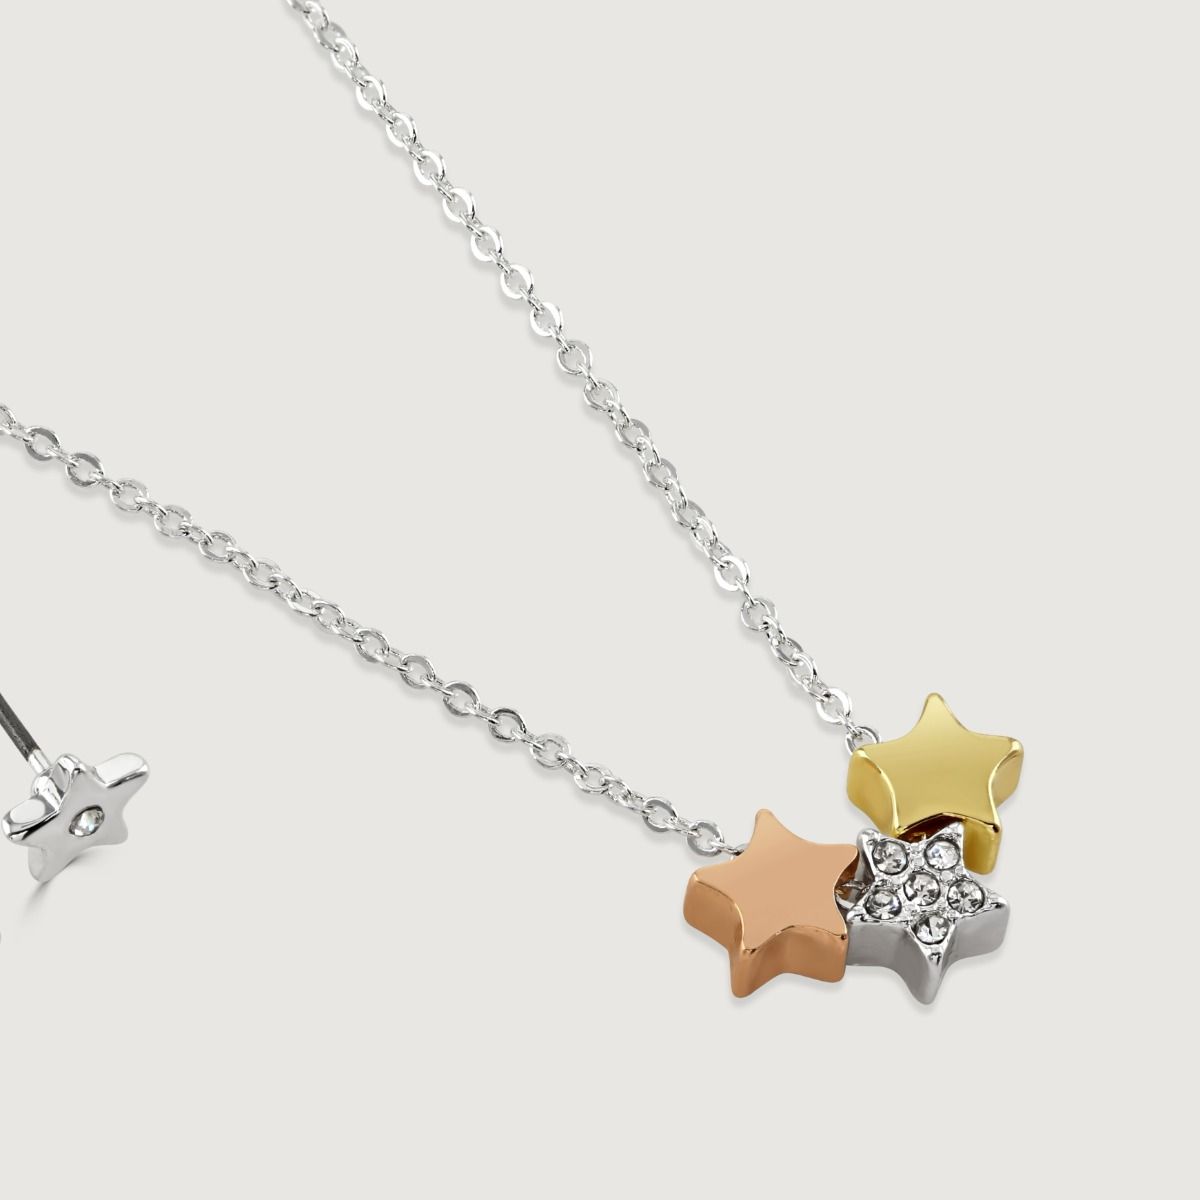 The Starburst pendant and earring set features delicate stars in silver plate, rose gold and gold tones with exquisite crystal detailing. Three stars are suspended from a silver-plated chain and paired with silver plated stud earrings, making this the per